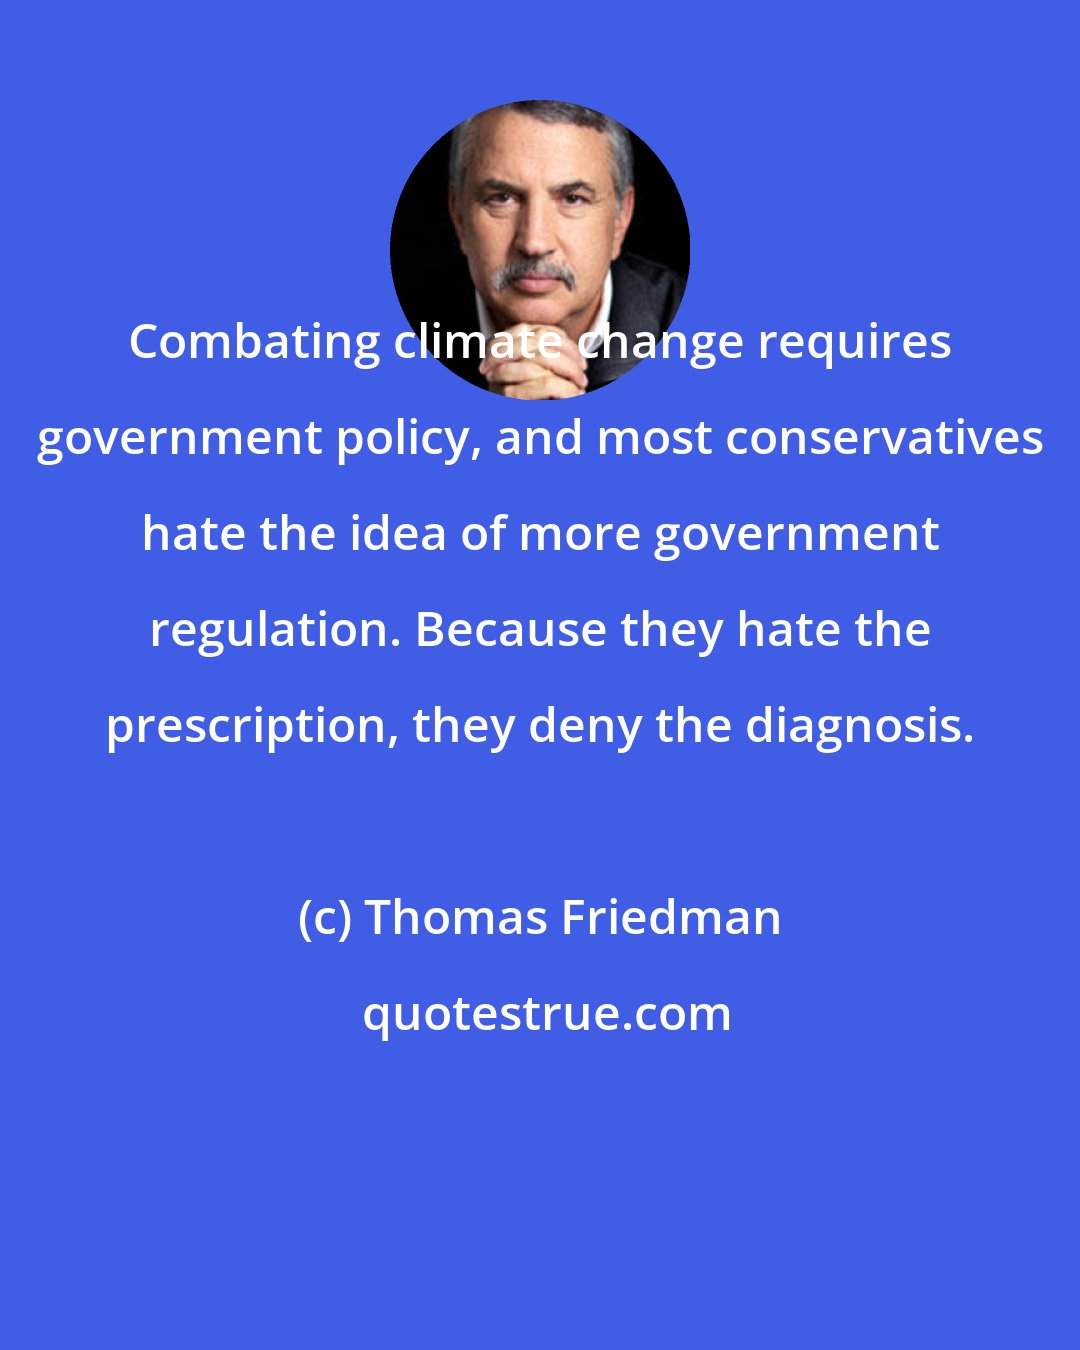 Thomas Friedman: Combating climate change requires government policy, and most conservatives hate the idea of more government regulation. Because they hate the prescription, they deny the diagnosis.